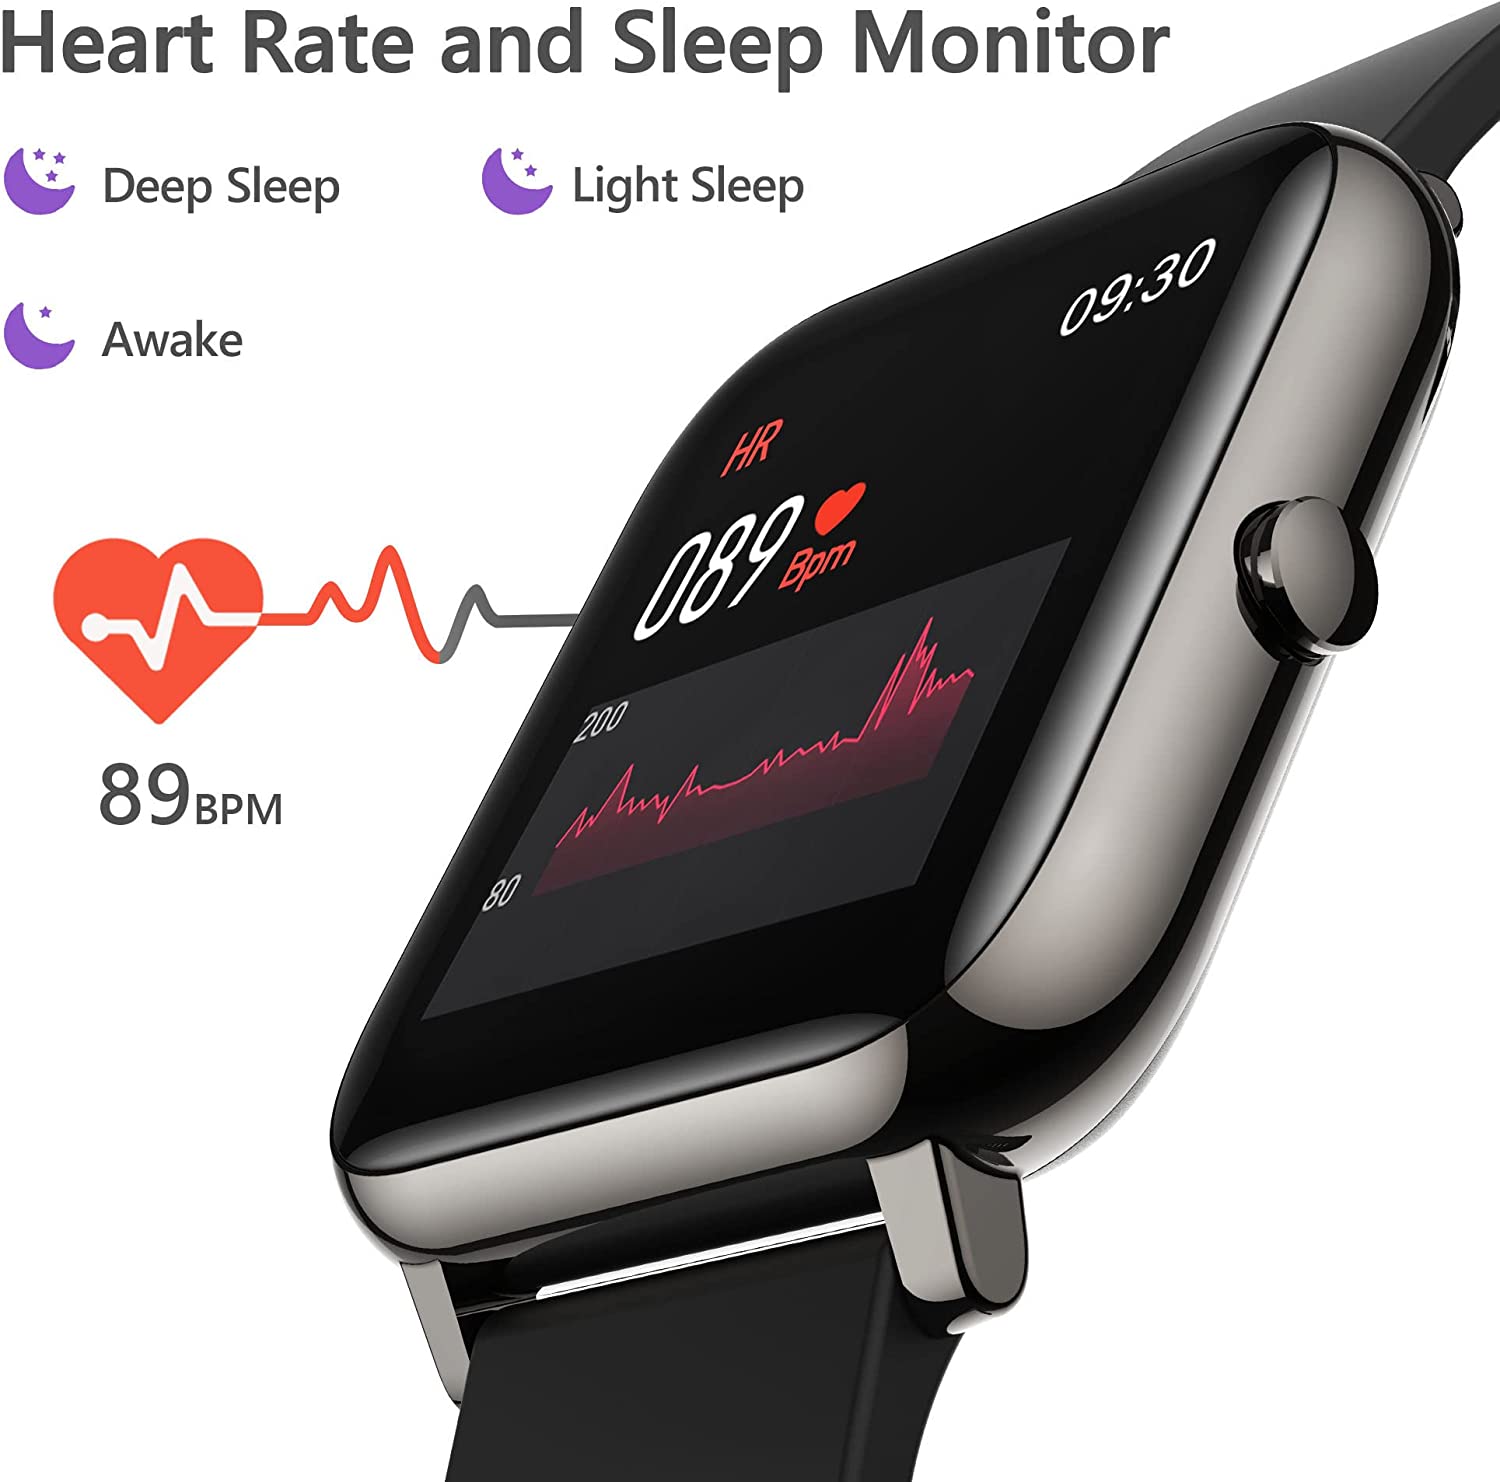 ZINMARK Smart Watch, Fitness Tracker with Heart Rate Monitor, Blood Pressure, Blood Oxygen Tracking, 1.4 Inch Touch Screen Smartwatch Fitness Watch for Women Men Compatible with Android iOS